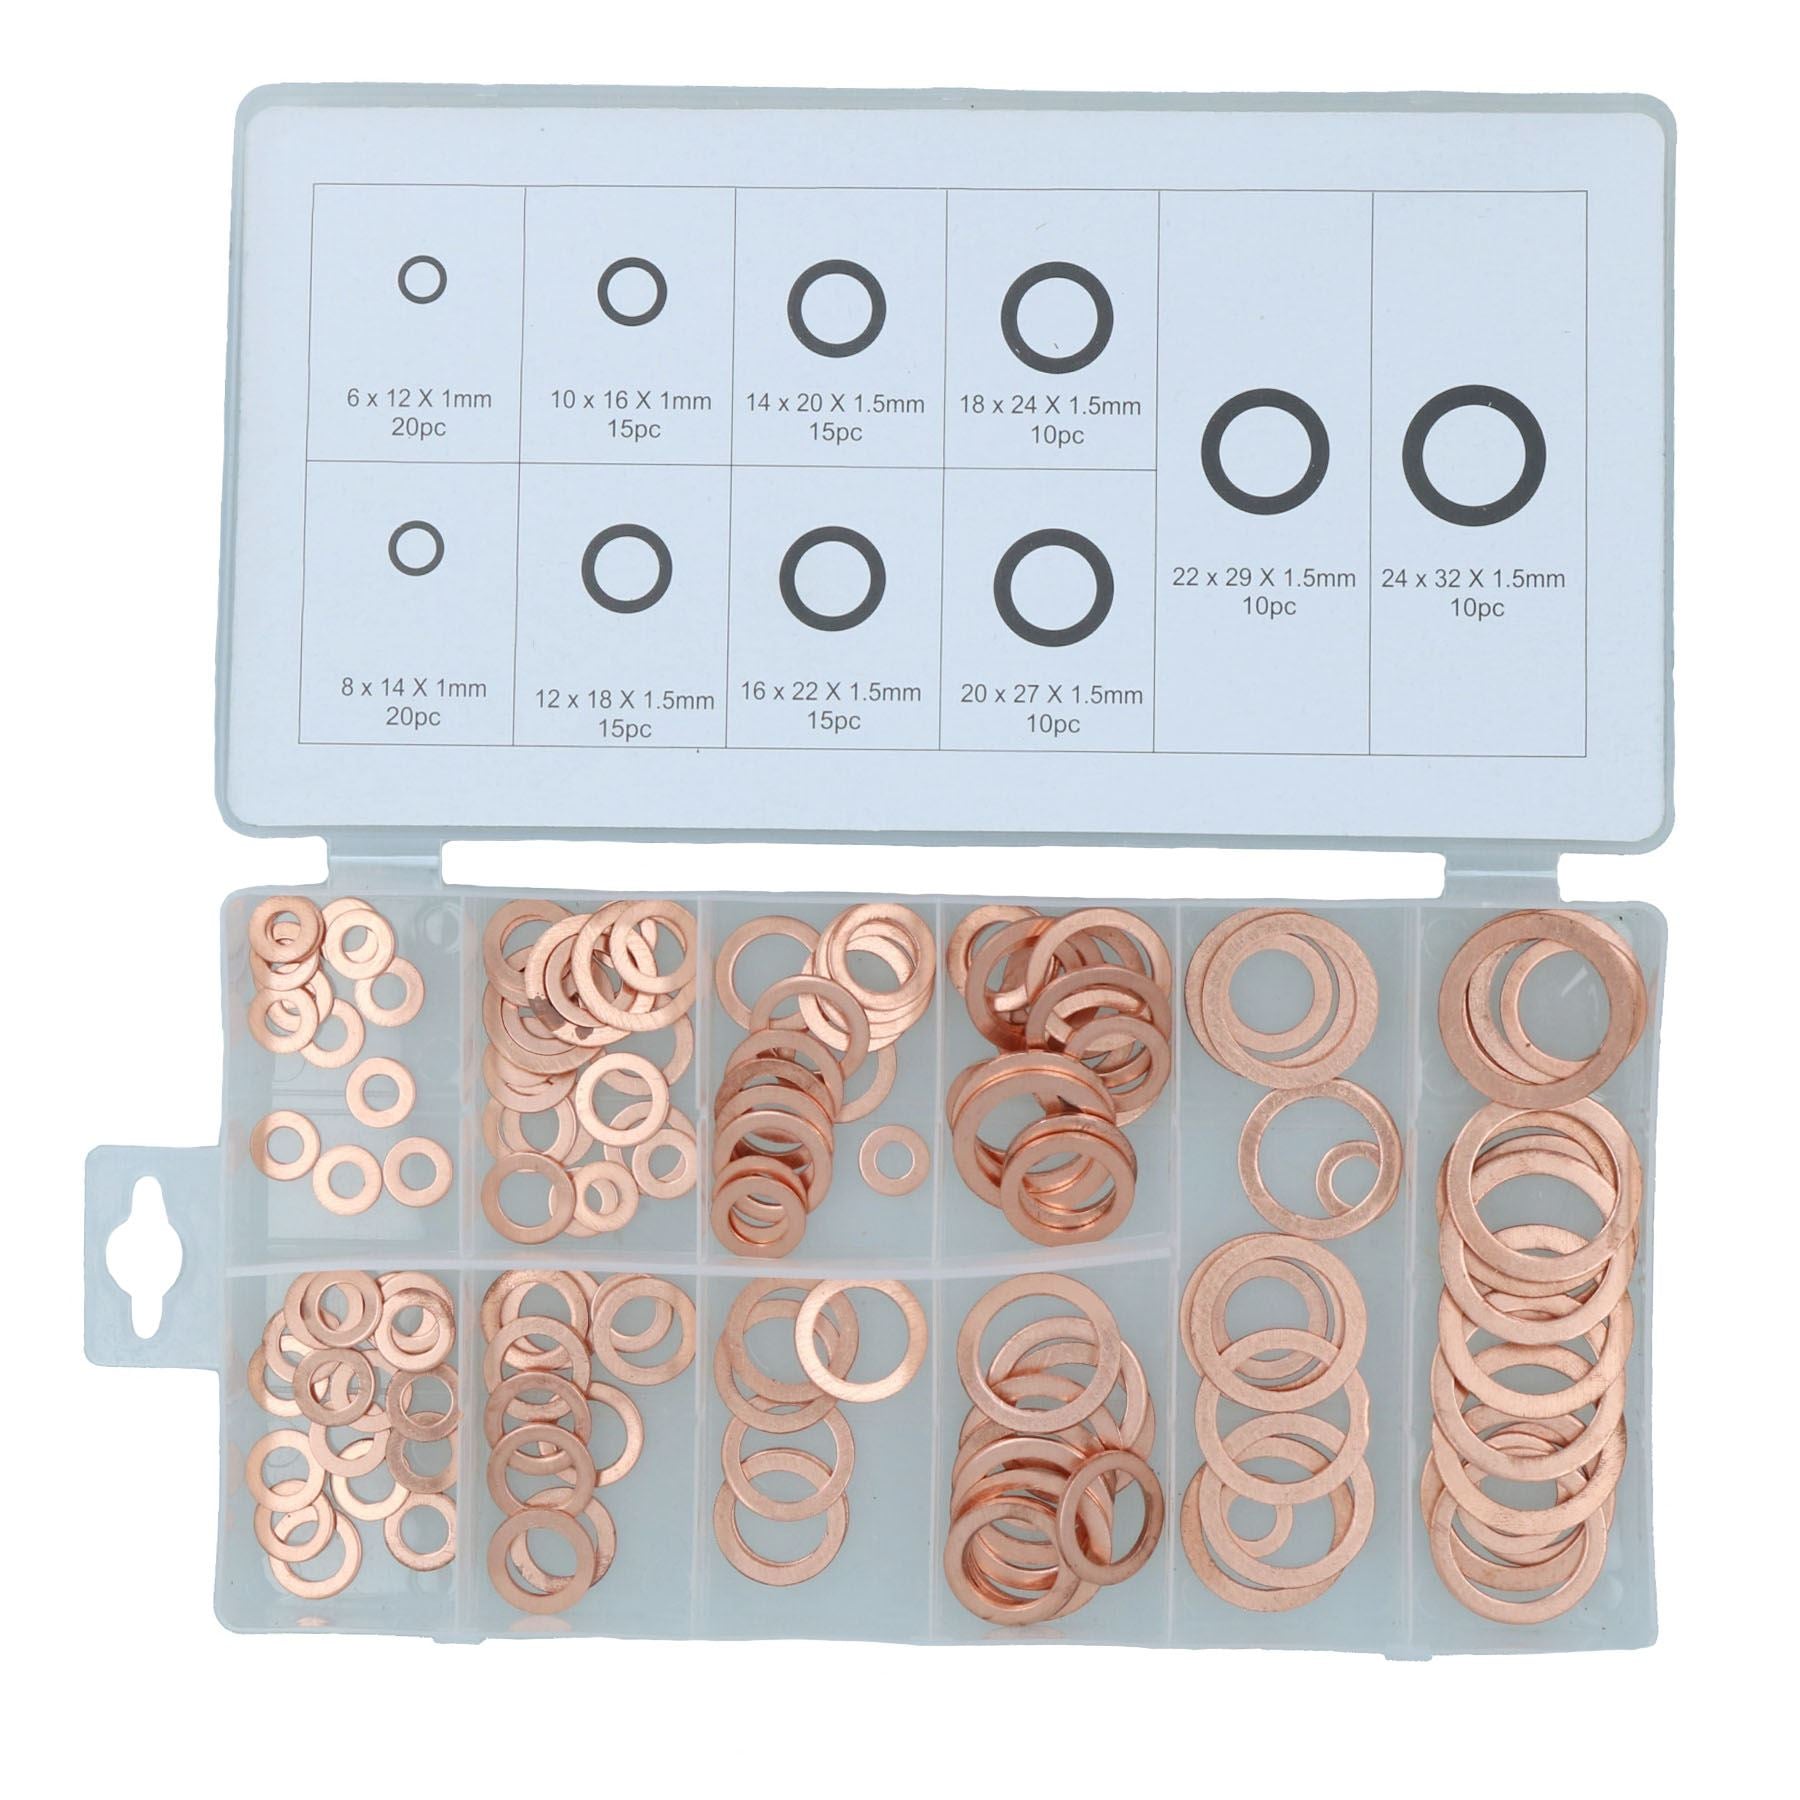 140pc Solid Copper Washer Assortment Set Seal Flat Gasket Metric Sizes 6-24mm